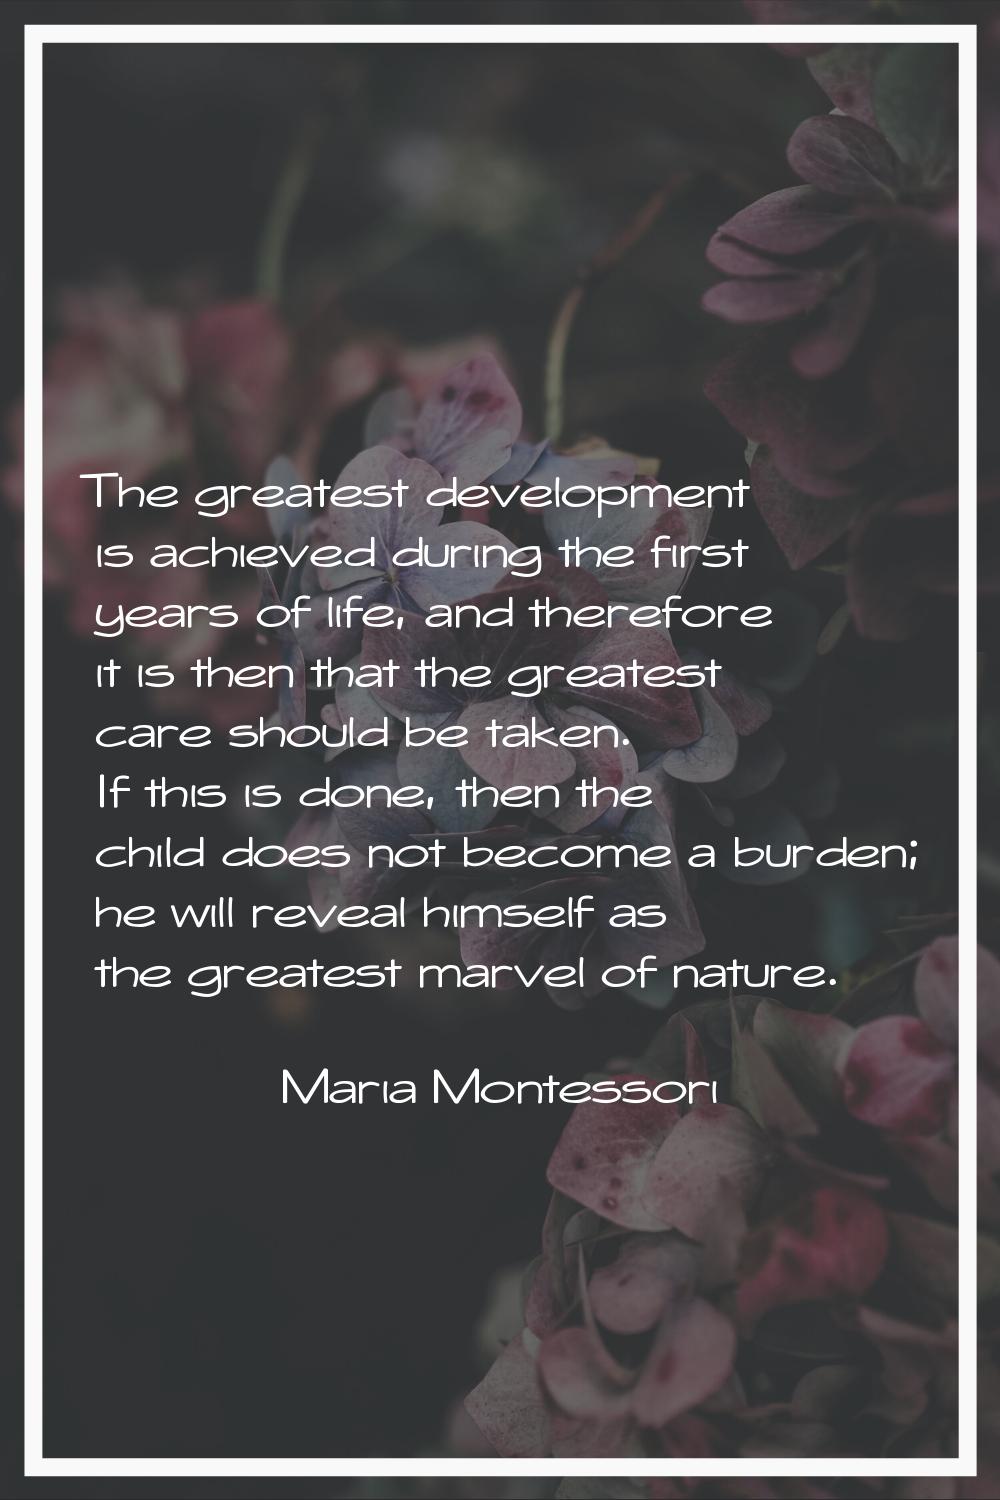 The greatest development is achieved during the first years of life, and therefore it is then that 